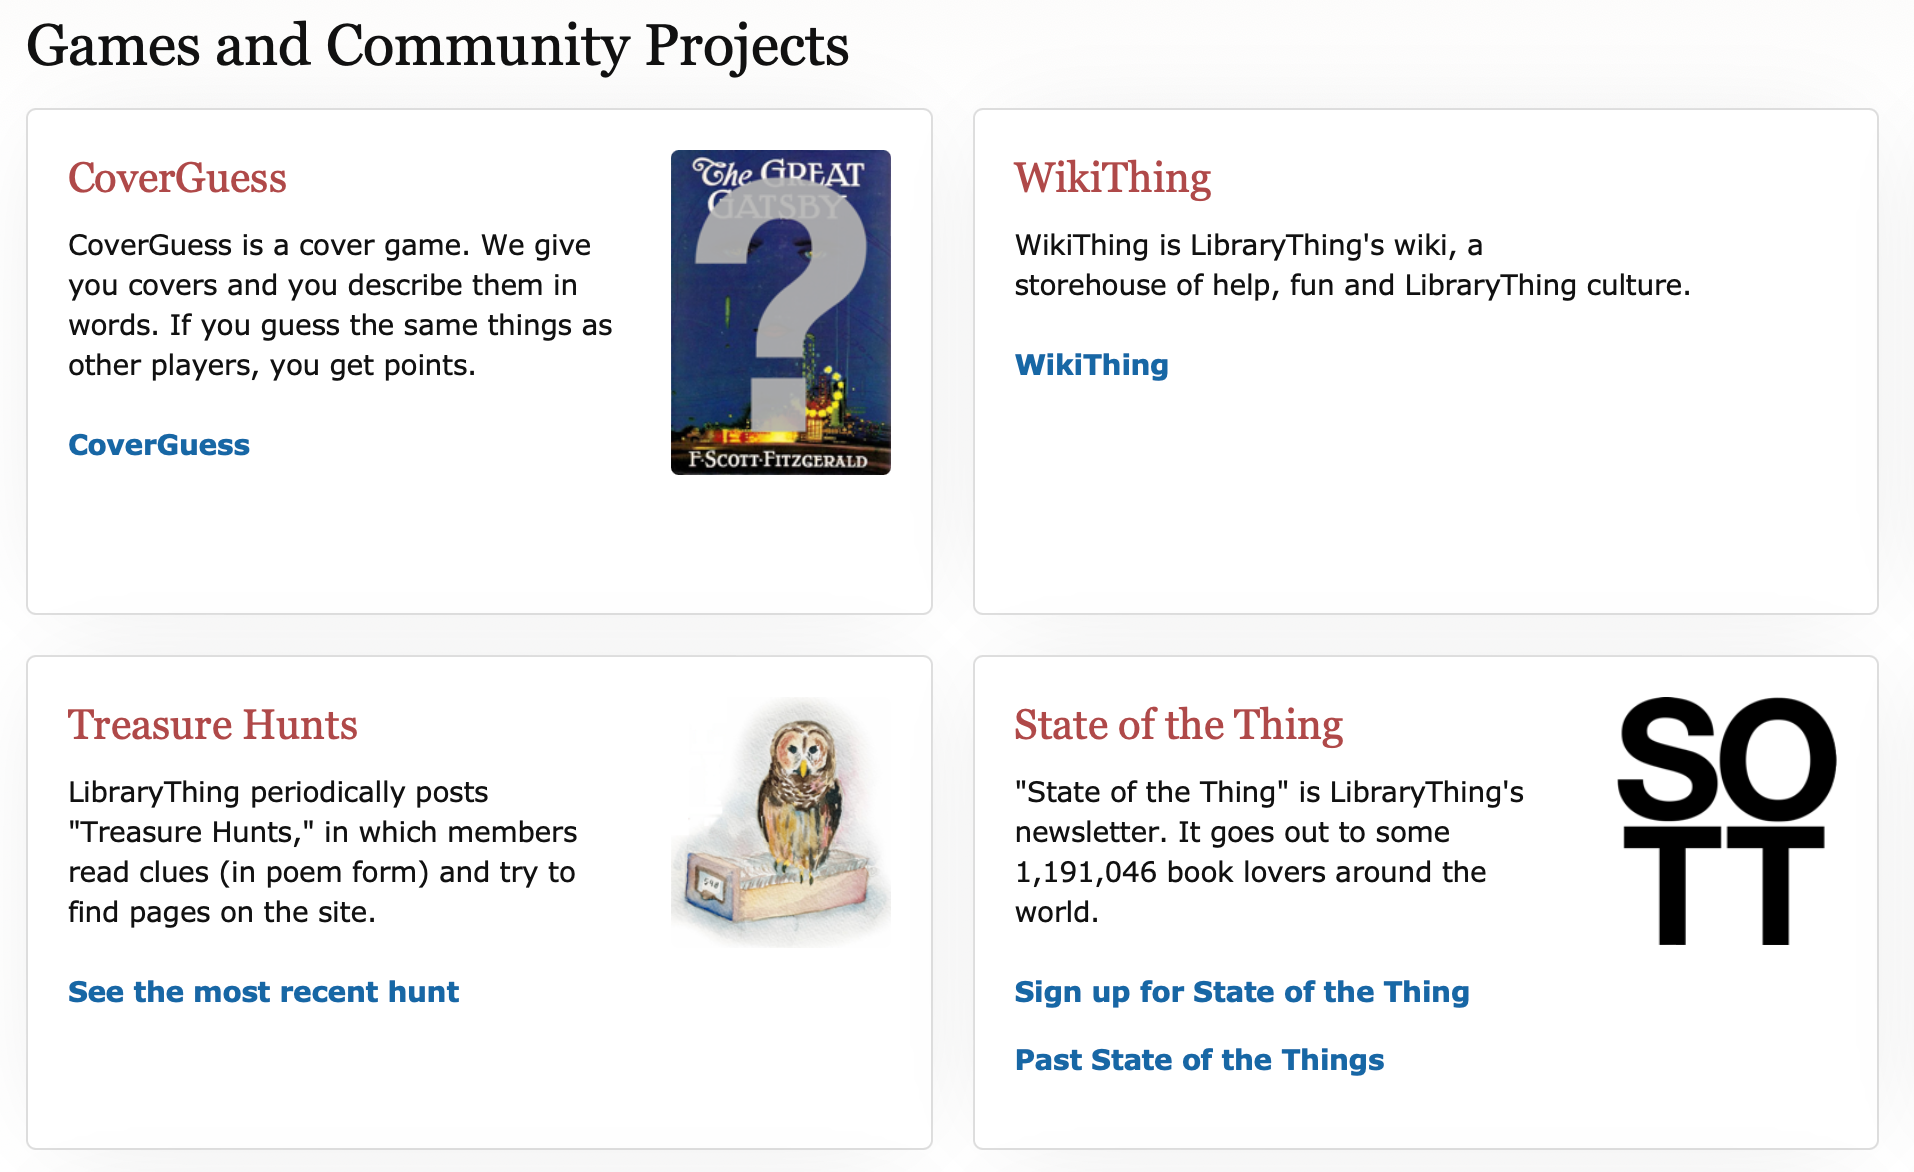 Screenshot of LibraryThings Games and Community Projects page with different games and newsletter options